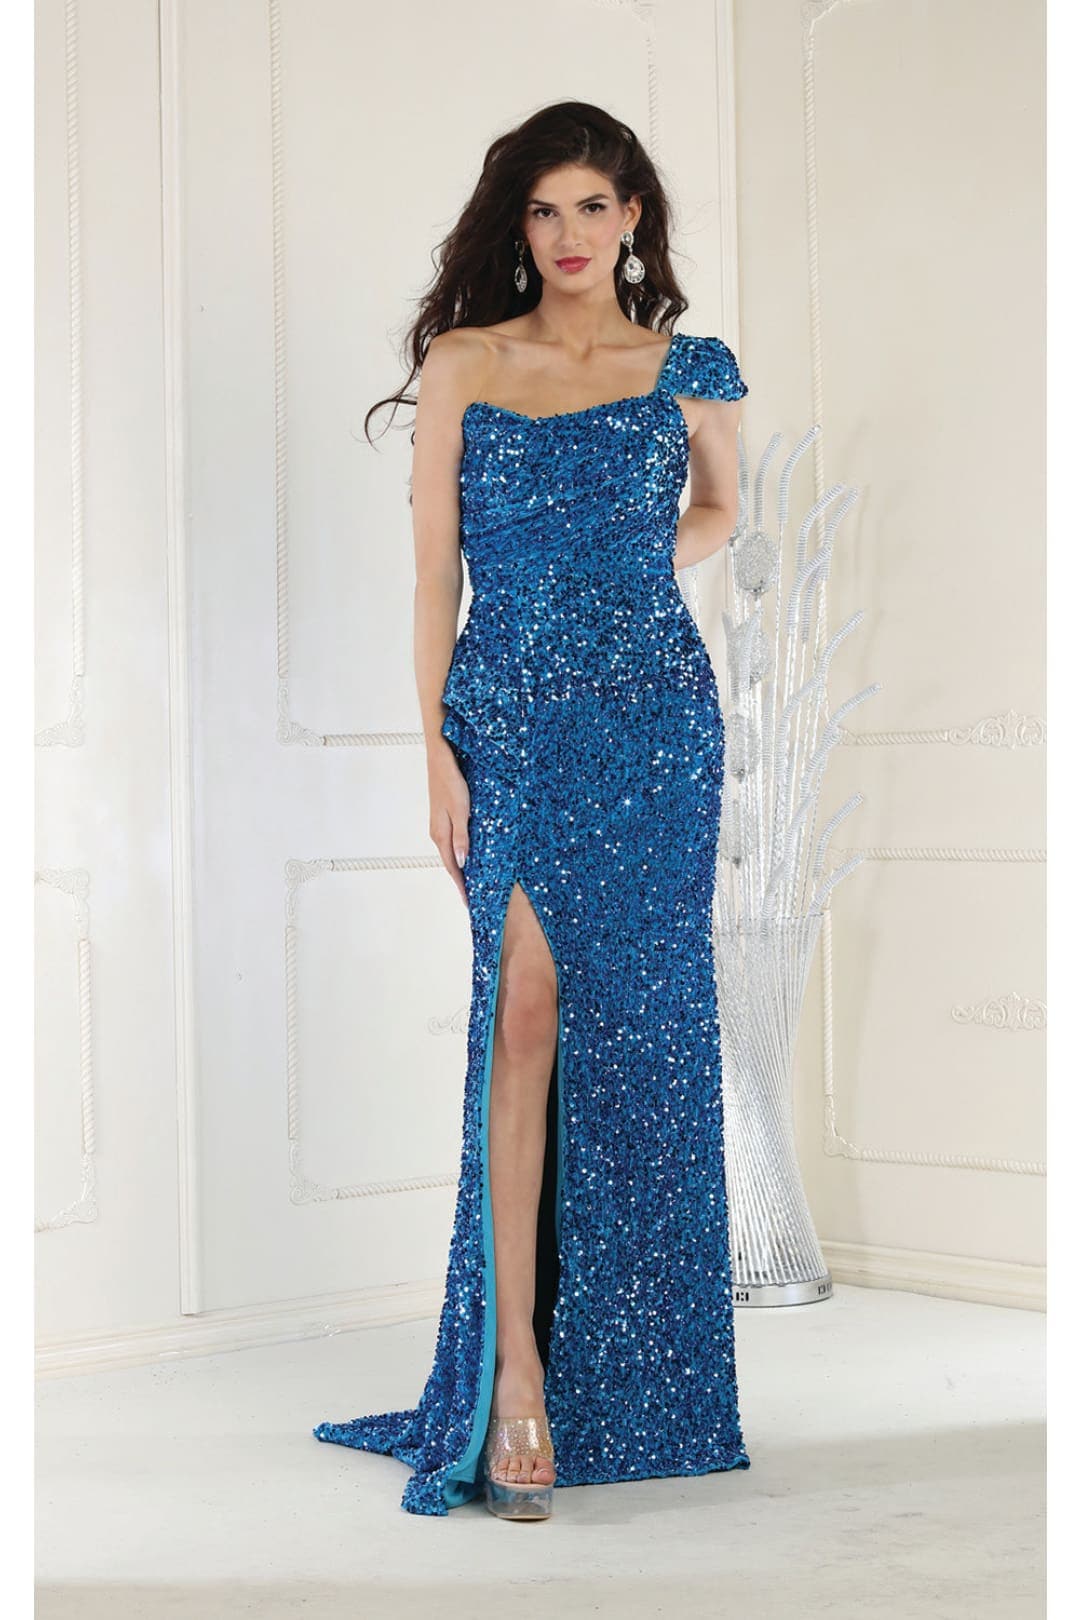 Royal Queen RQ8003 Thigh High Slit Formal Dress - TURQUOISE / 4 - Dress